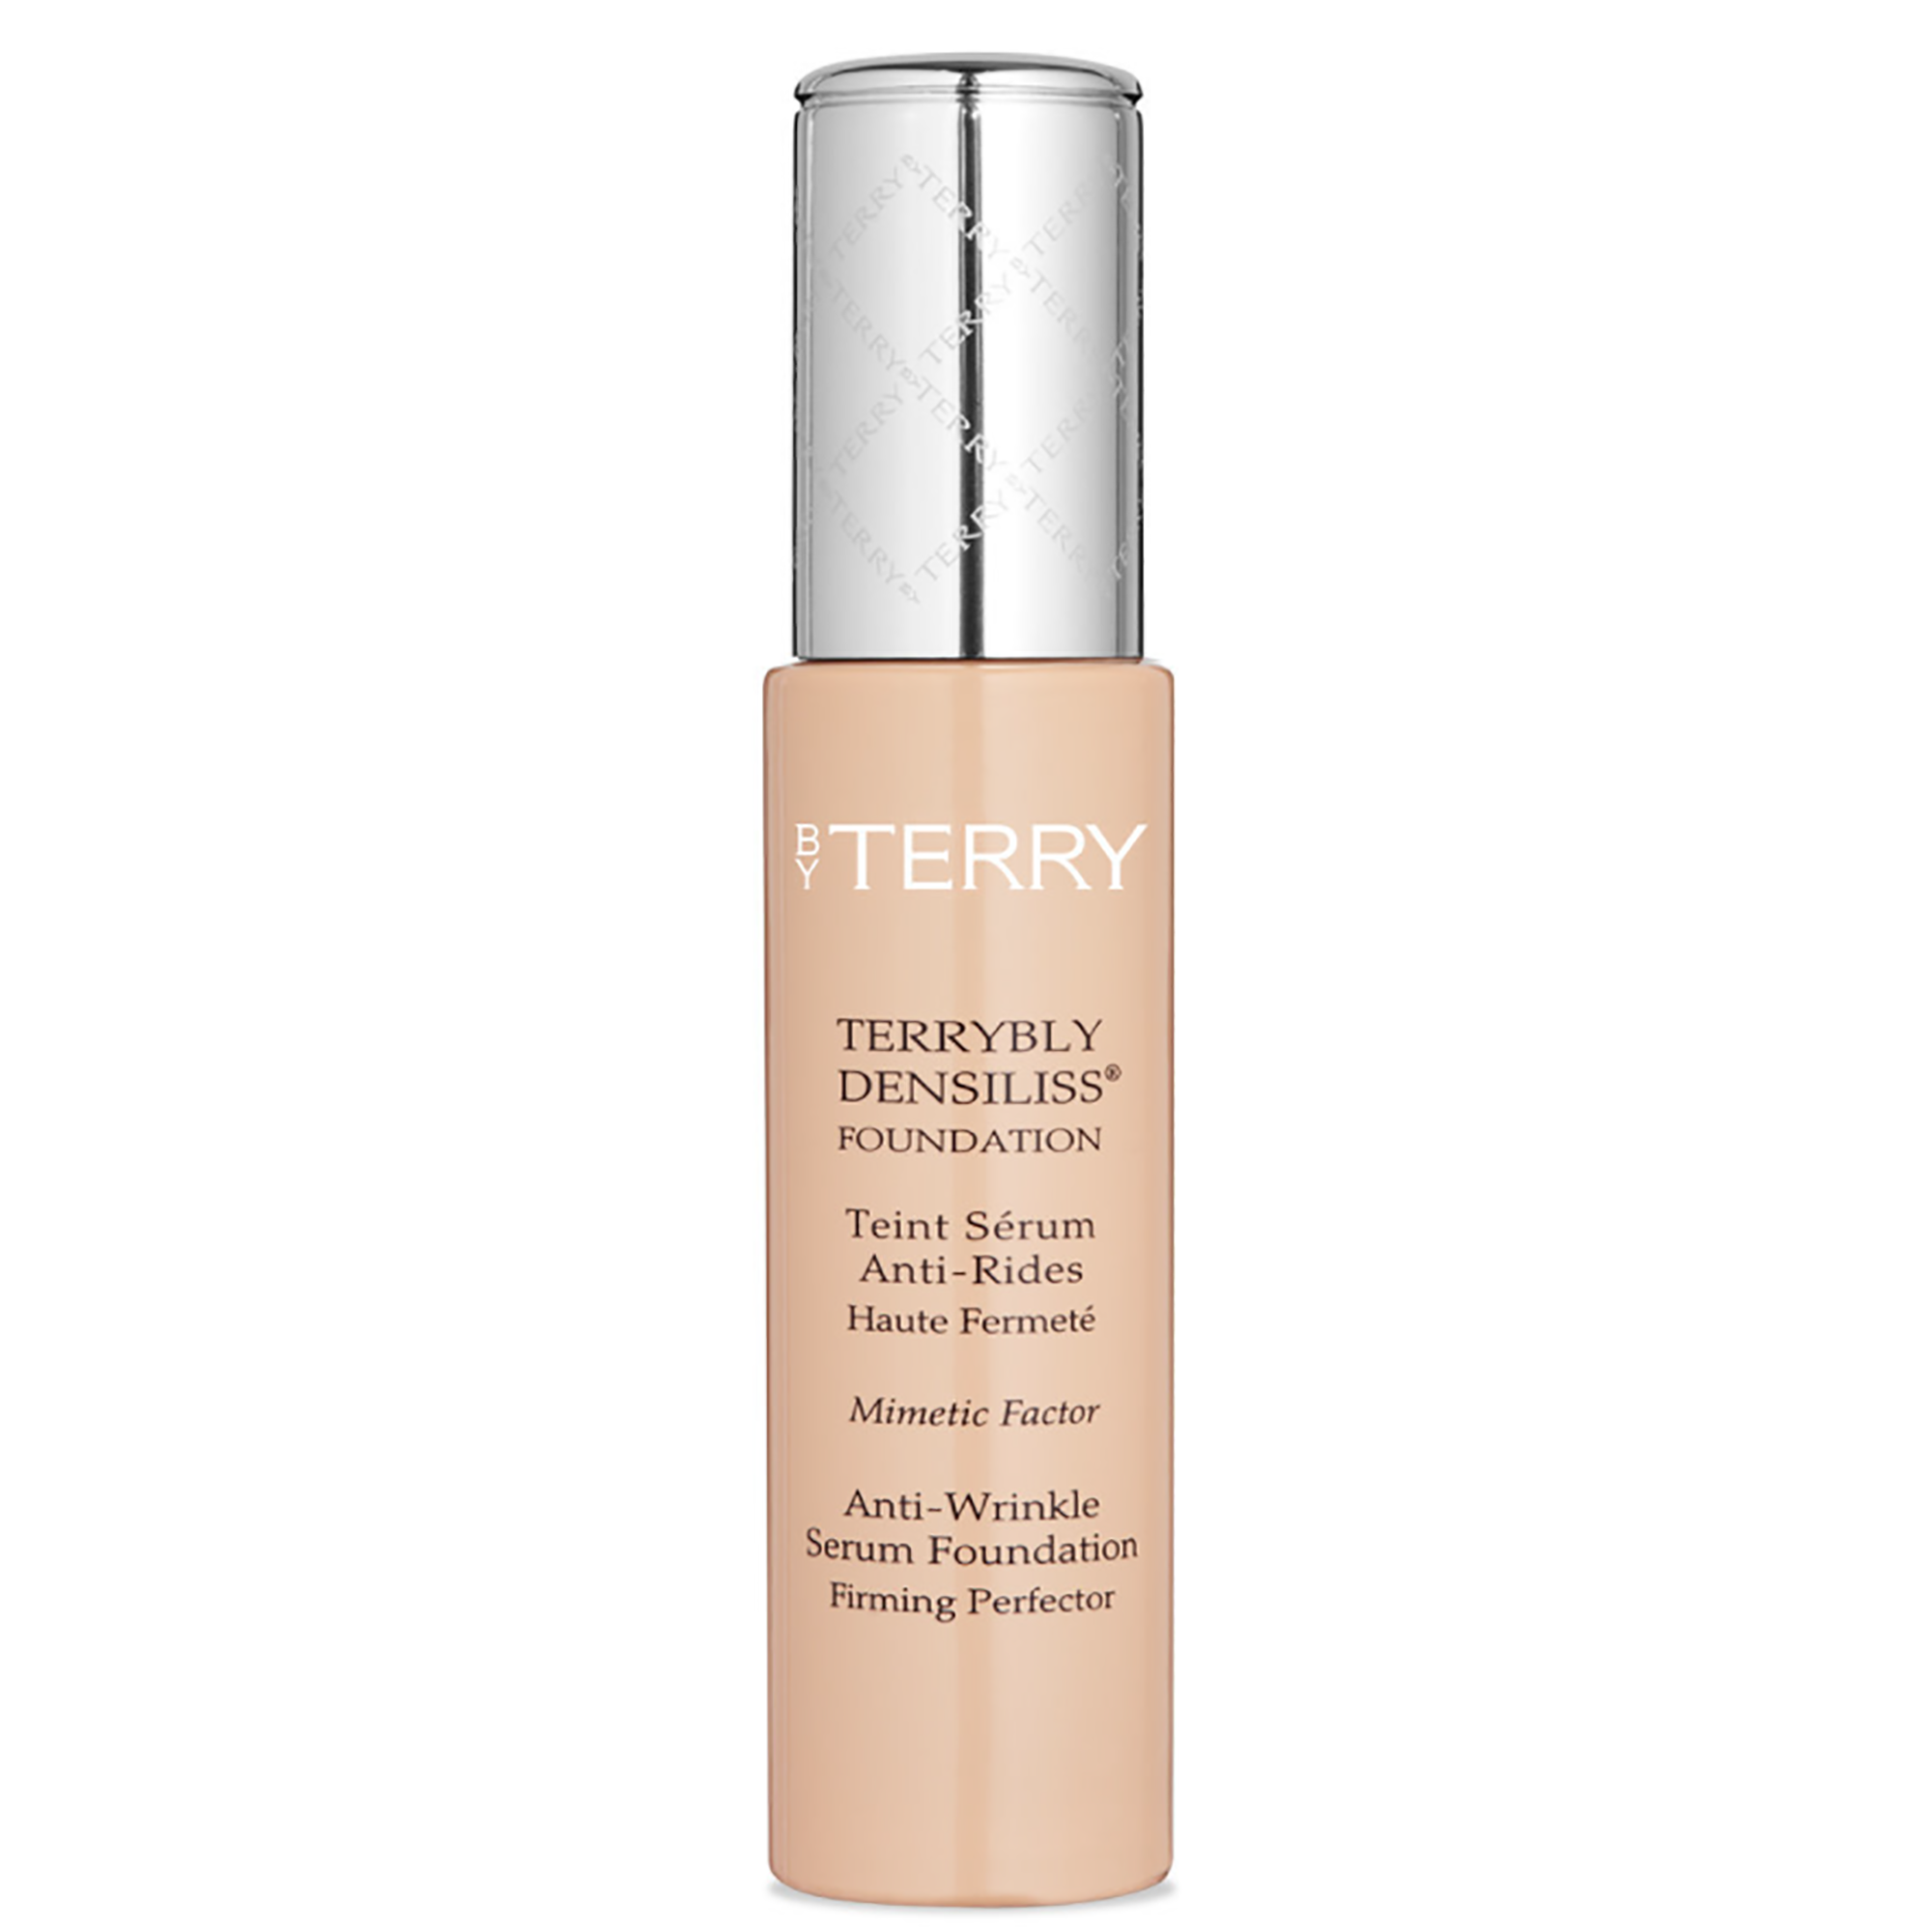 By Terry Terrybly Densiliss Anti-Wrinkle Serum Foundation #8 Warm Sand